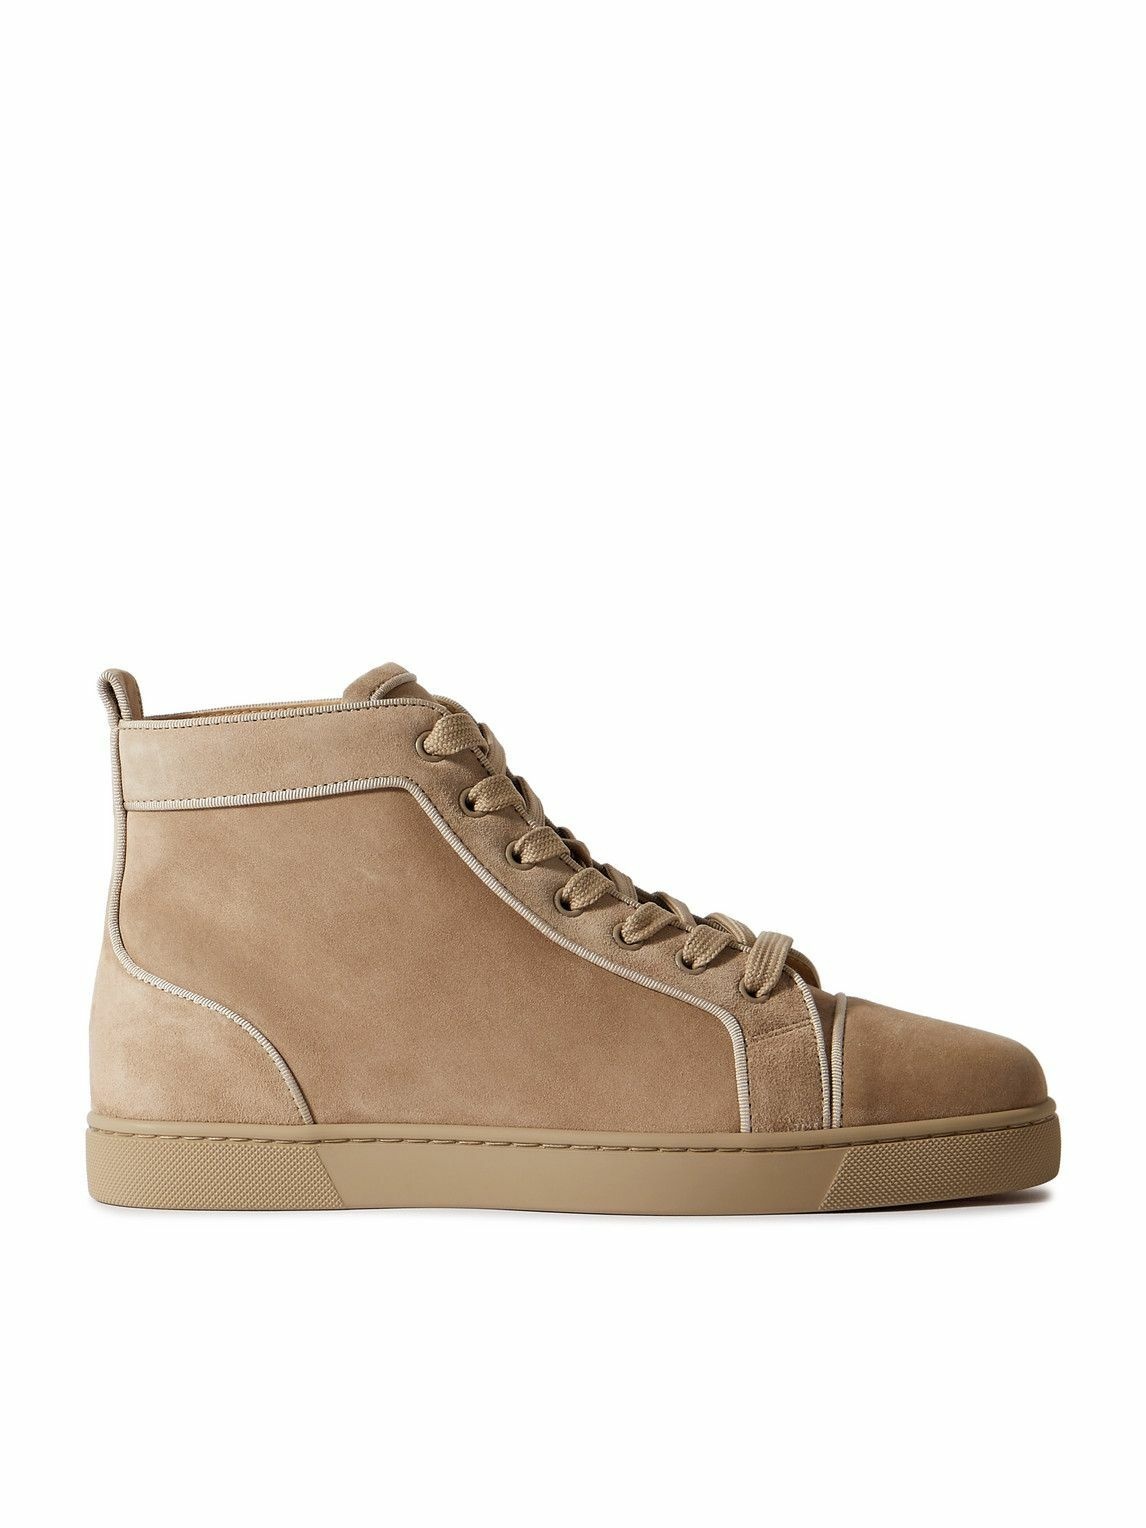 Photo: Christian Louboutin - Louis Orlato Grosgrain-Trimmed Suede High-Top Sneakers - Neutrals